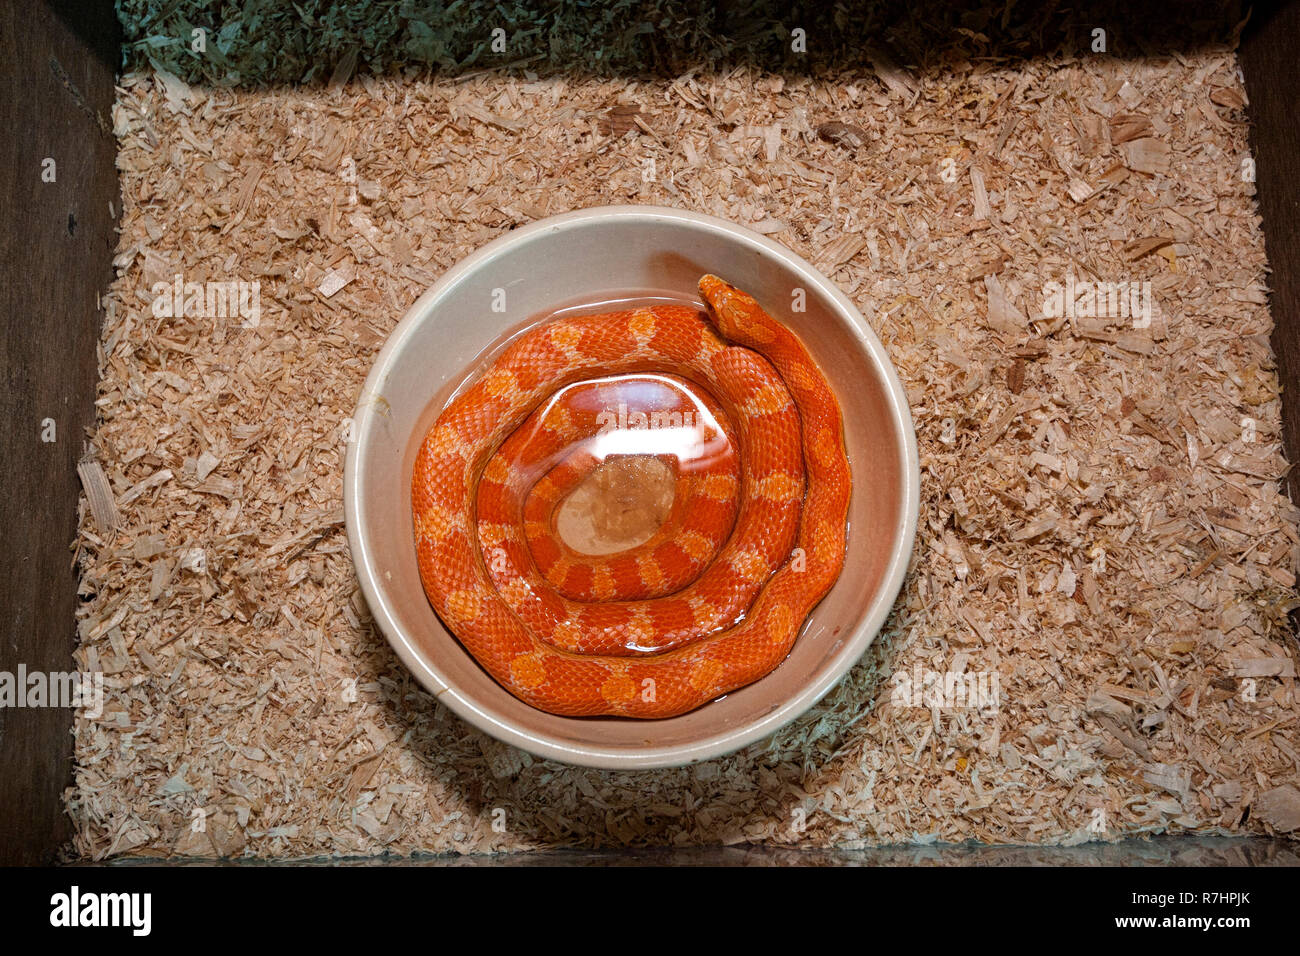 An orange snake in a bowl of water Stock Photo